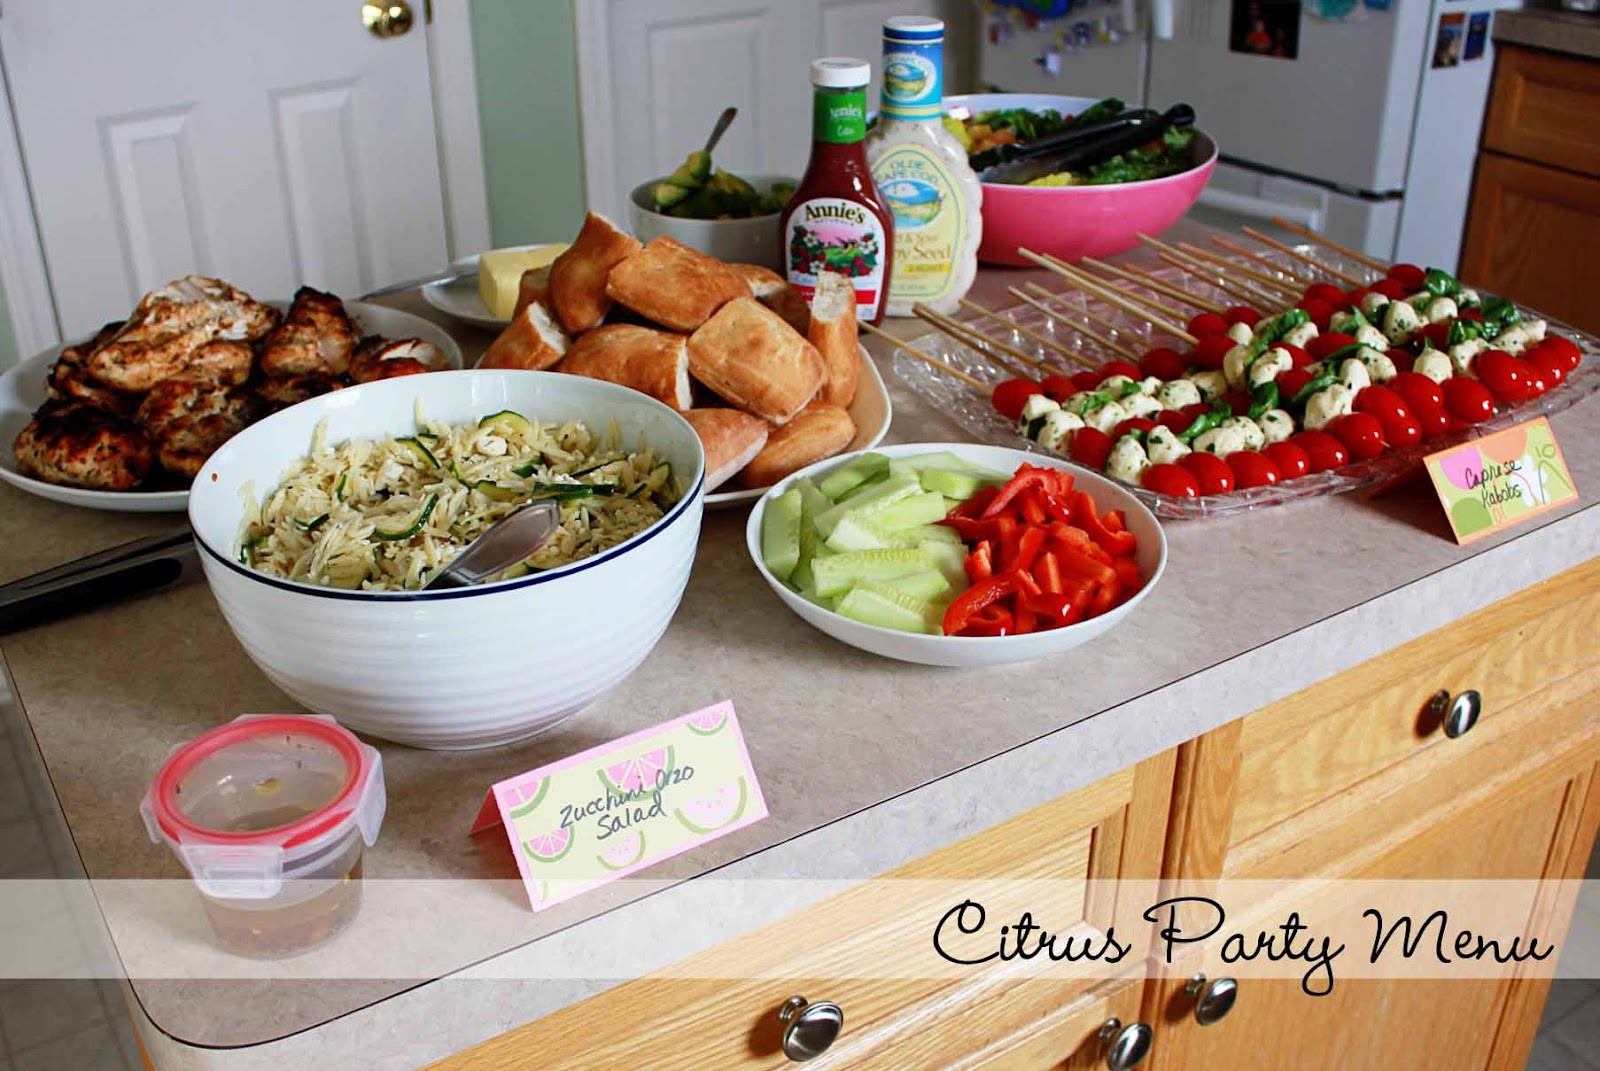 Food Ideas For 1St Birthday Party With Adults
 Katie s Nesting Spot A Citrus Themed Birthday Party Menu